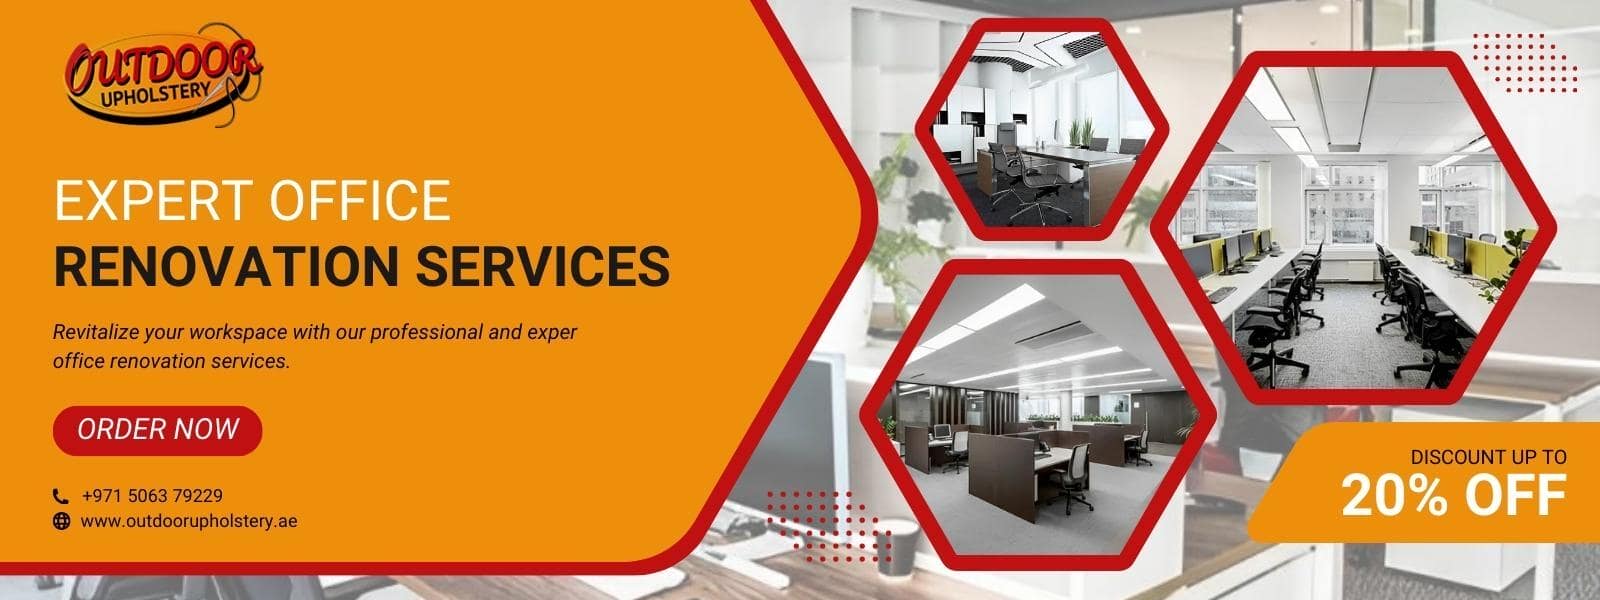 Expert Office Renovation Services